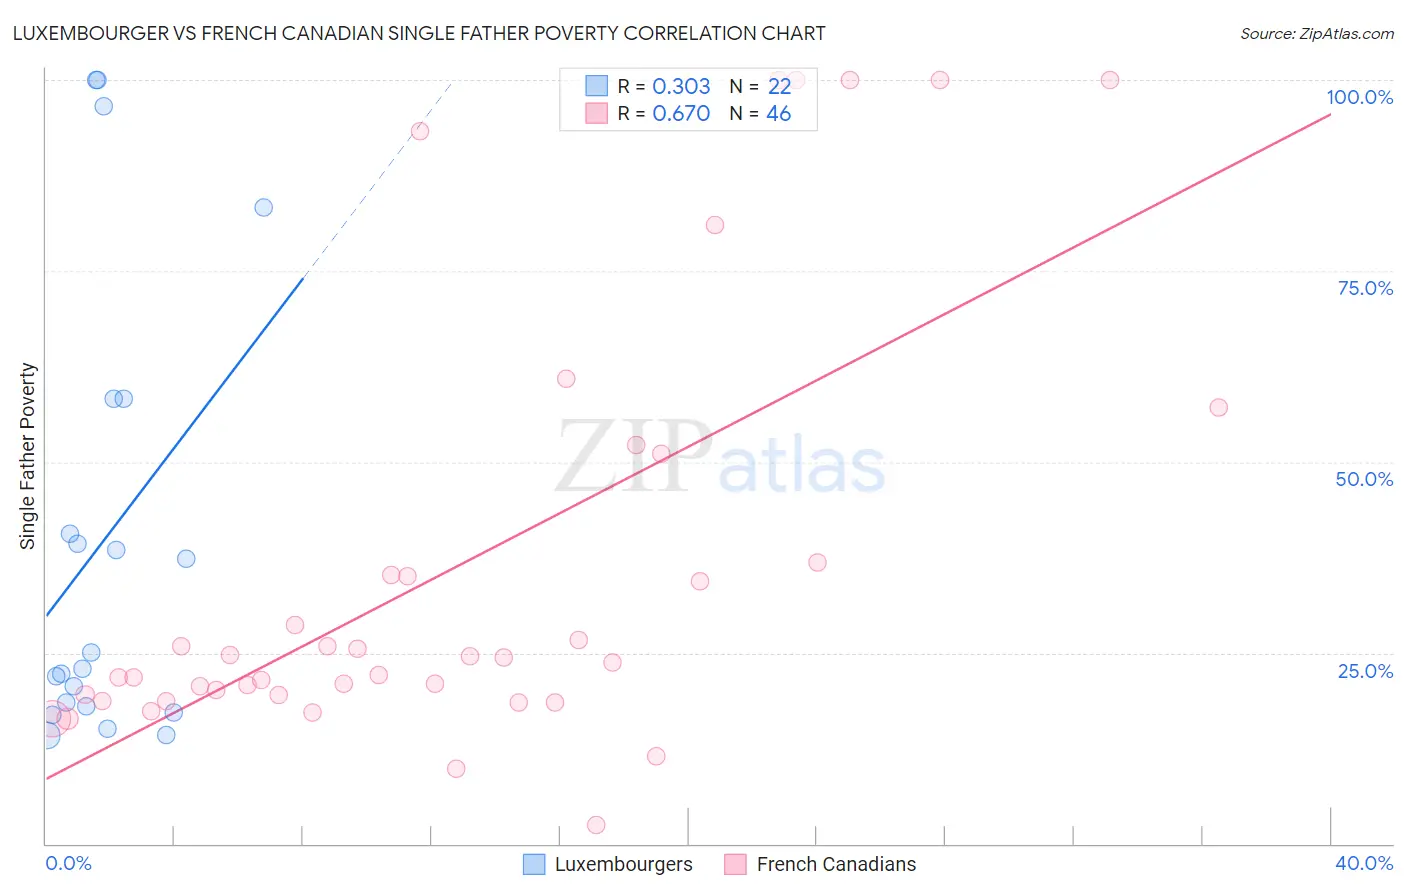 Luxembourger vs French Canadian Single Father Poverty